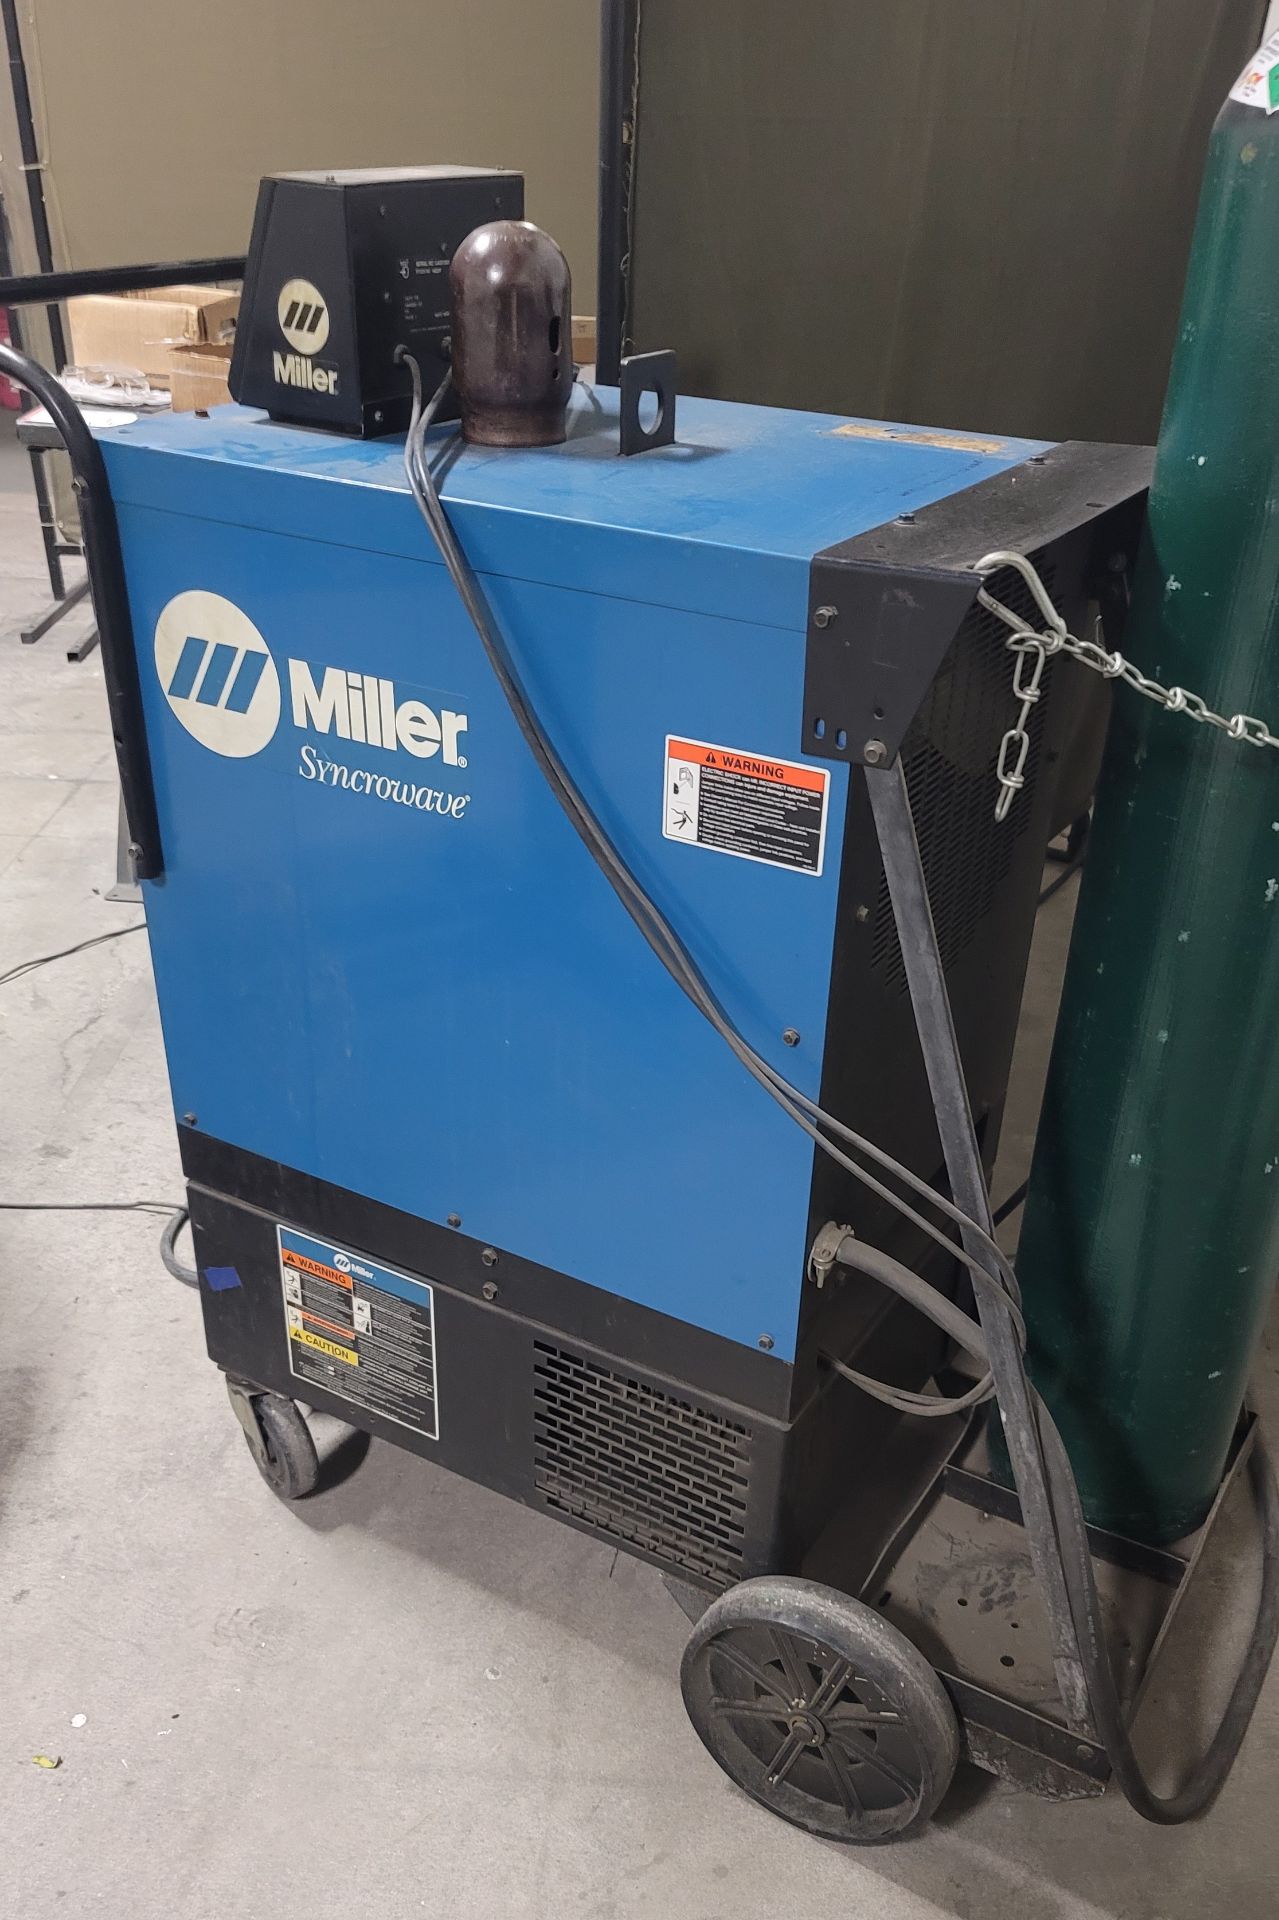 MILLER SYNCROWAVE 250 TIG WELDER, S/N LA081418, **IMMEX REGISTERED EQUIPMENT (NEEDS TO RETURN TO THE - Image 3 of 4